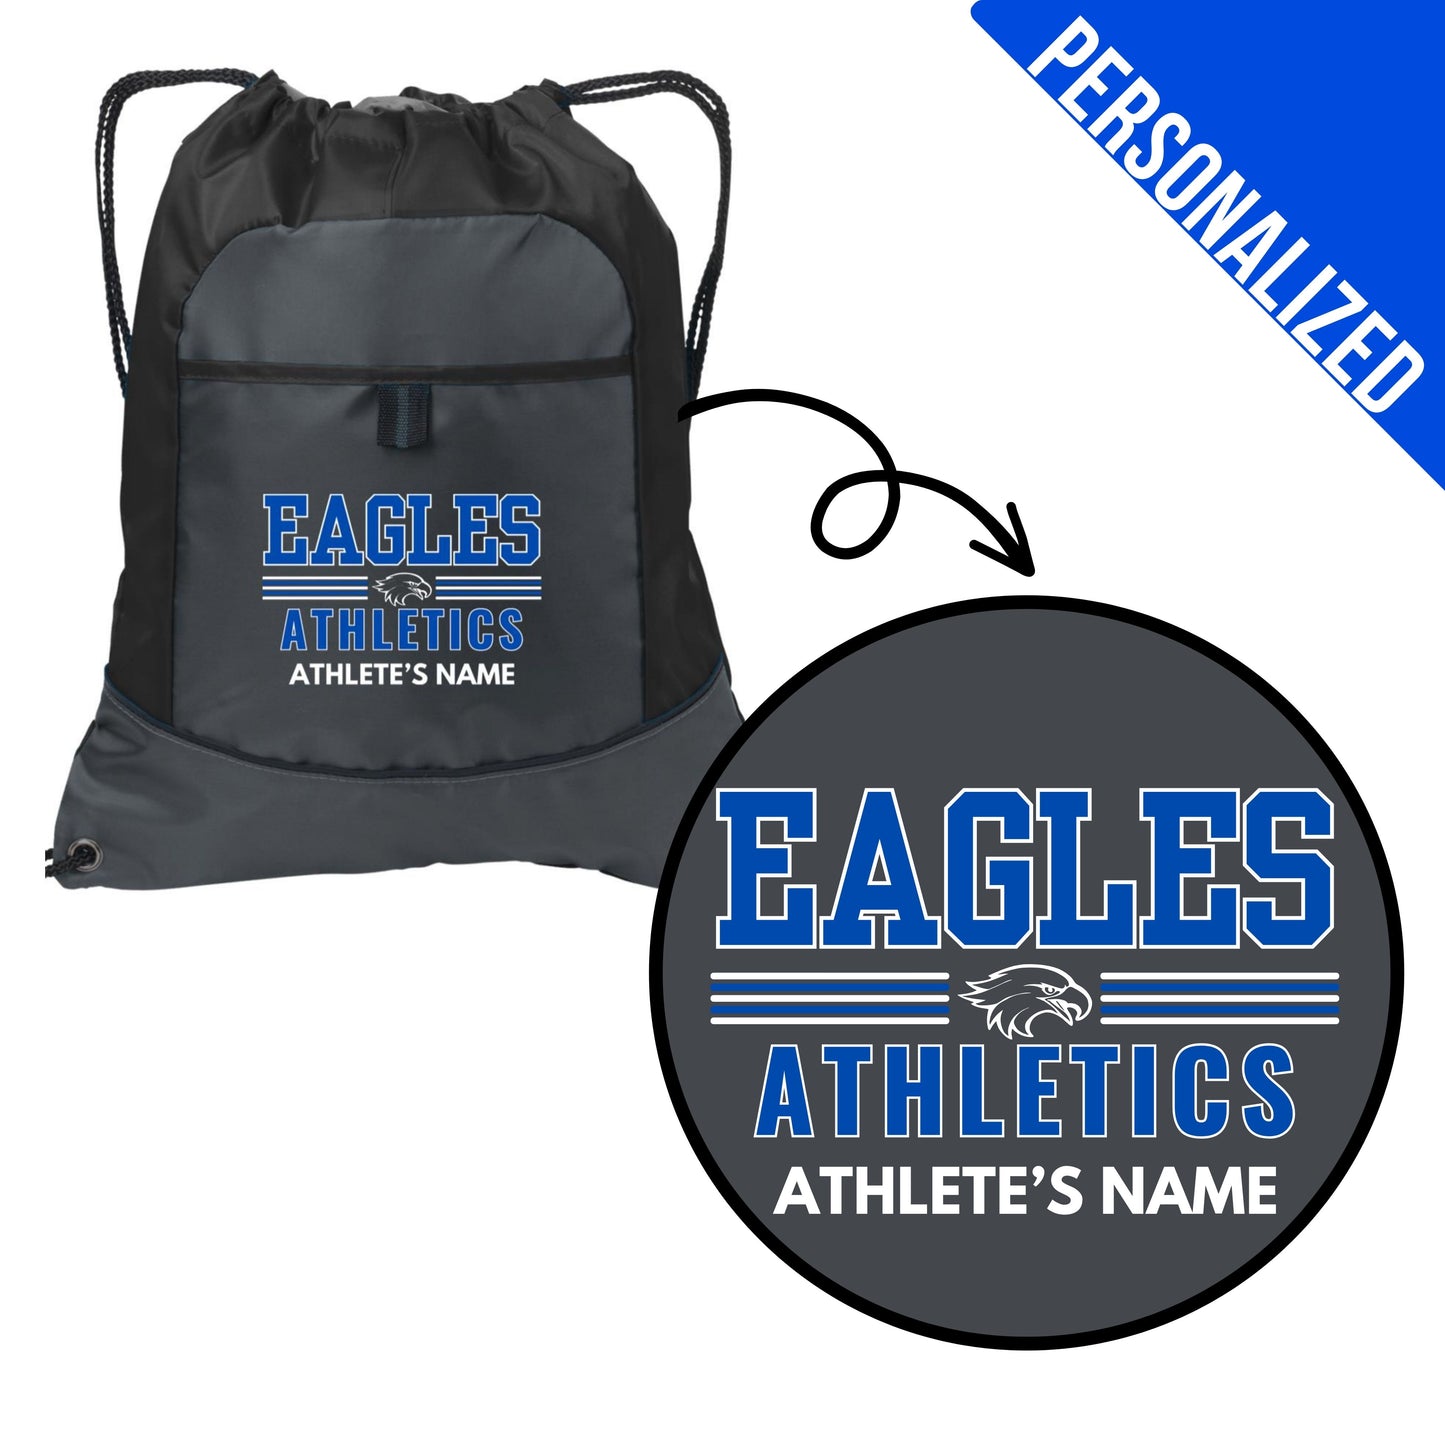 Eagles Athletics Bags- Personalized